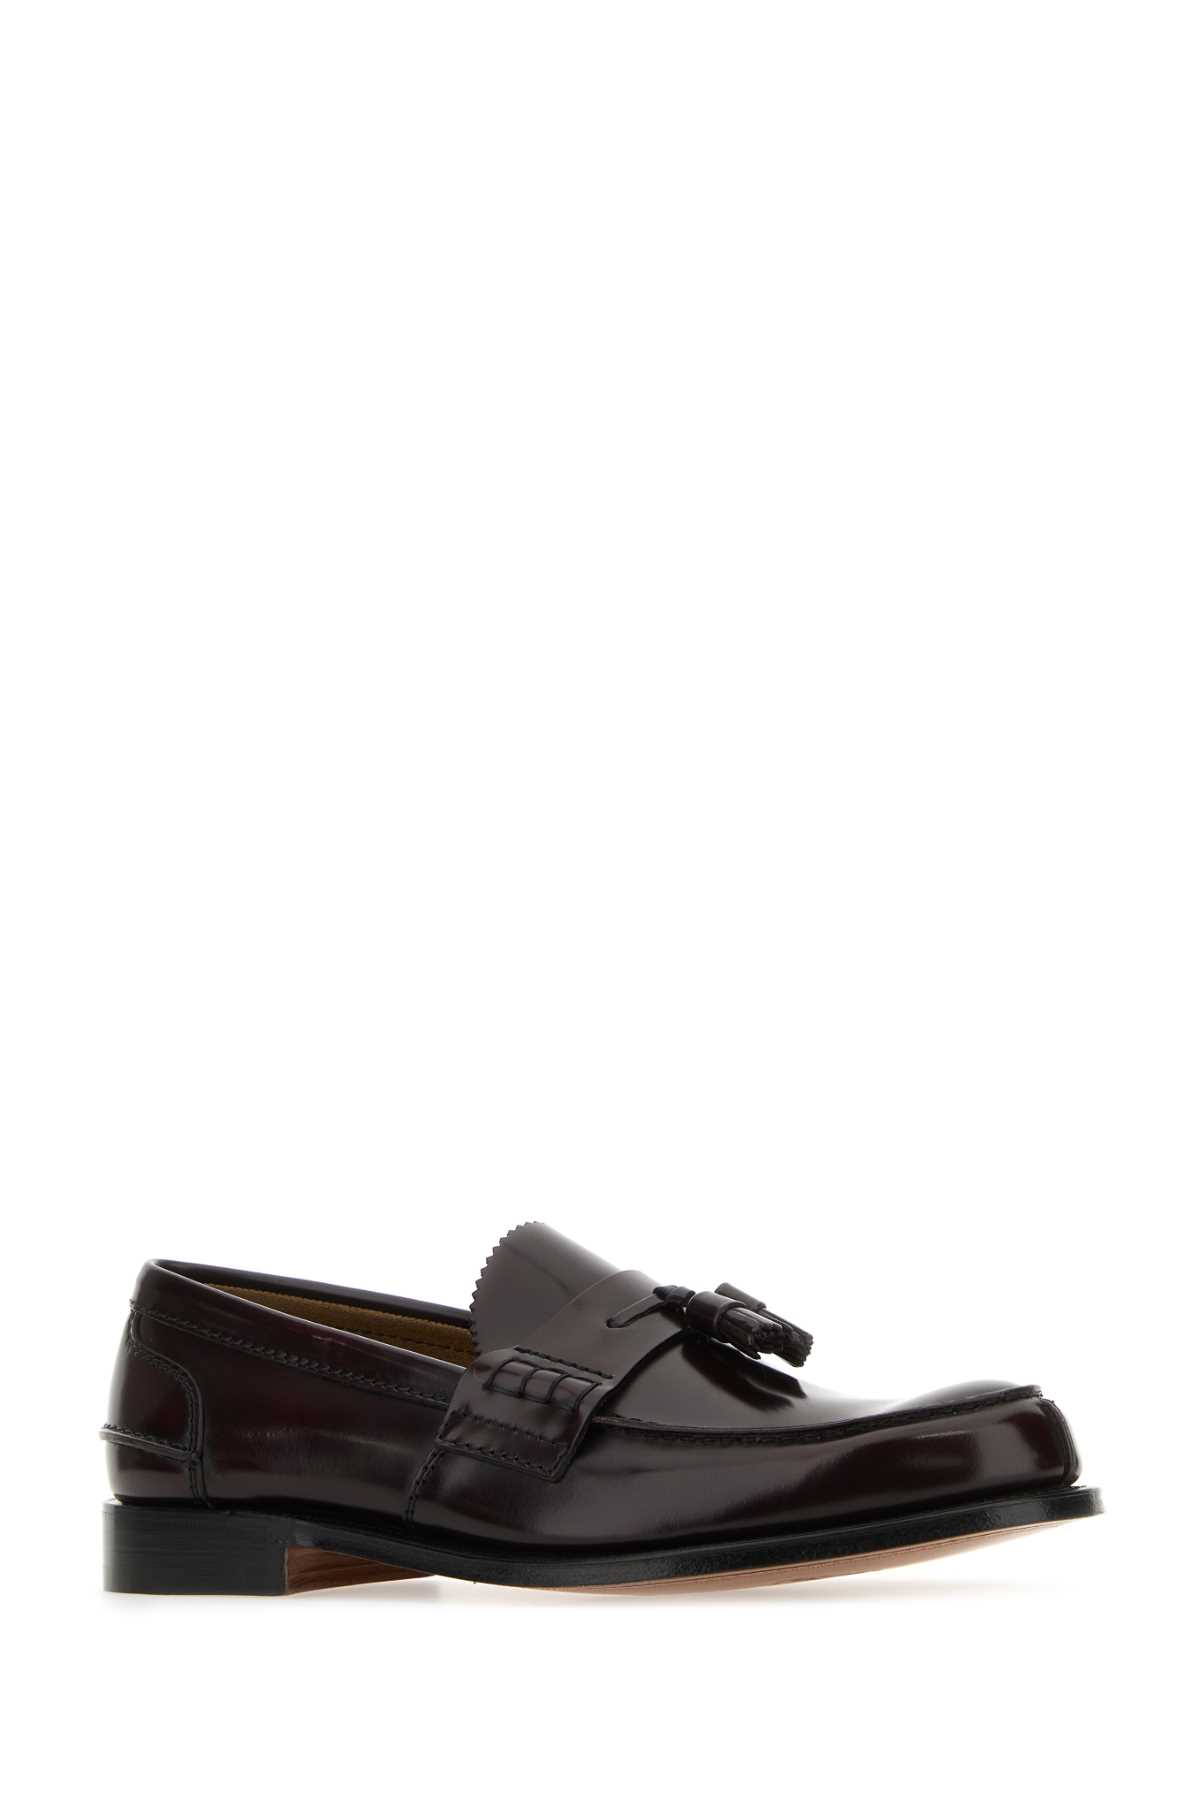 Shop Church's Burgundy Leather Tiverton Loafers